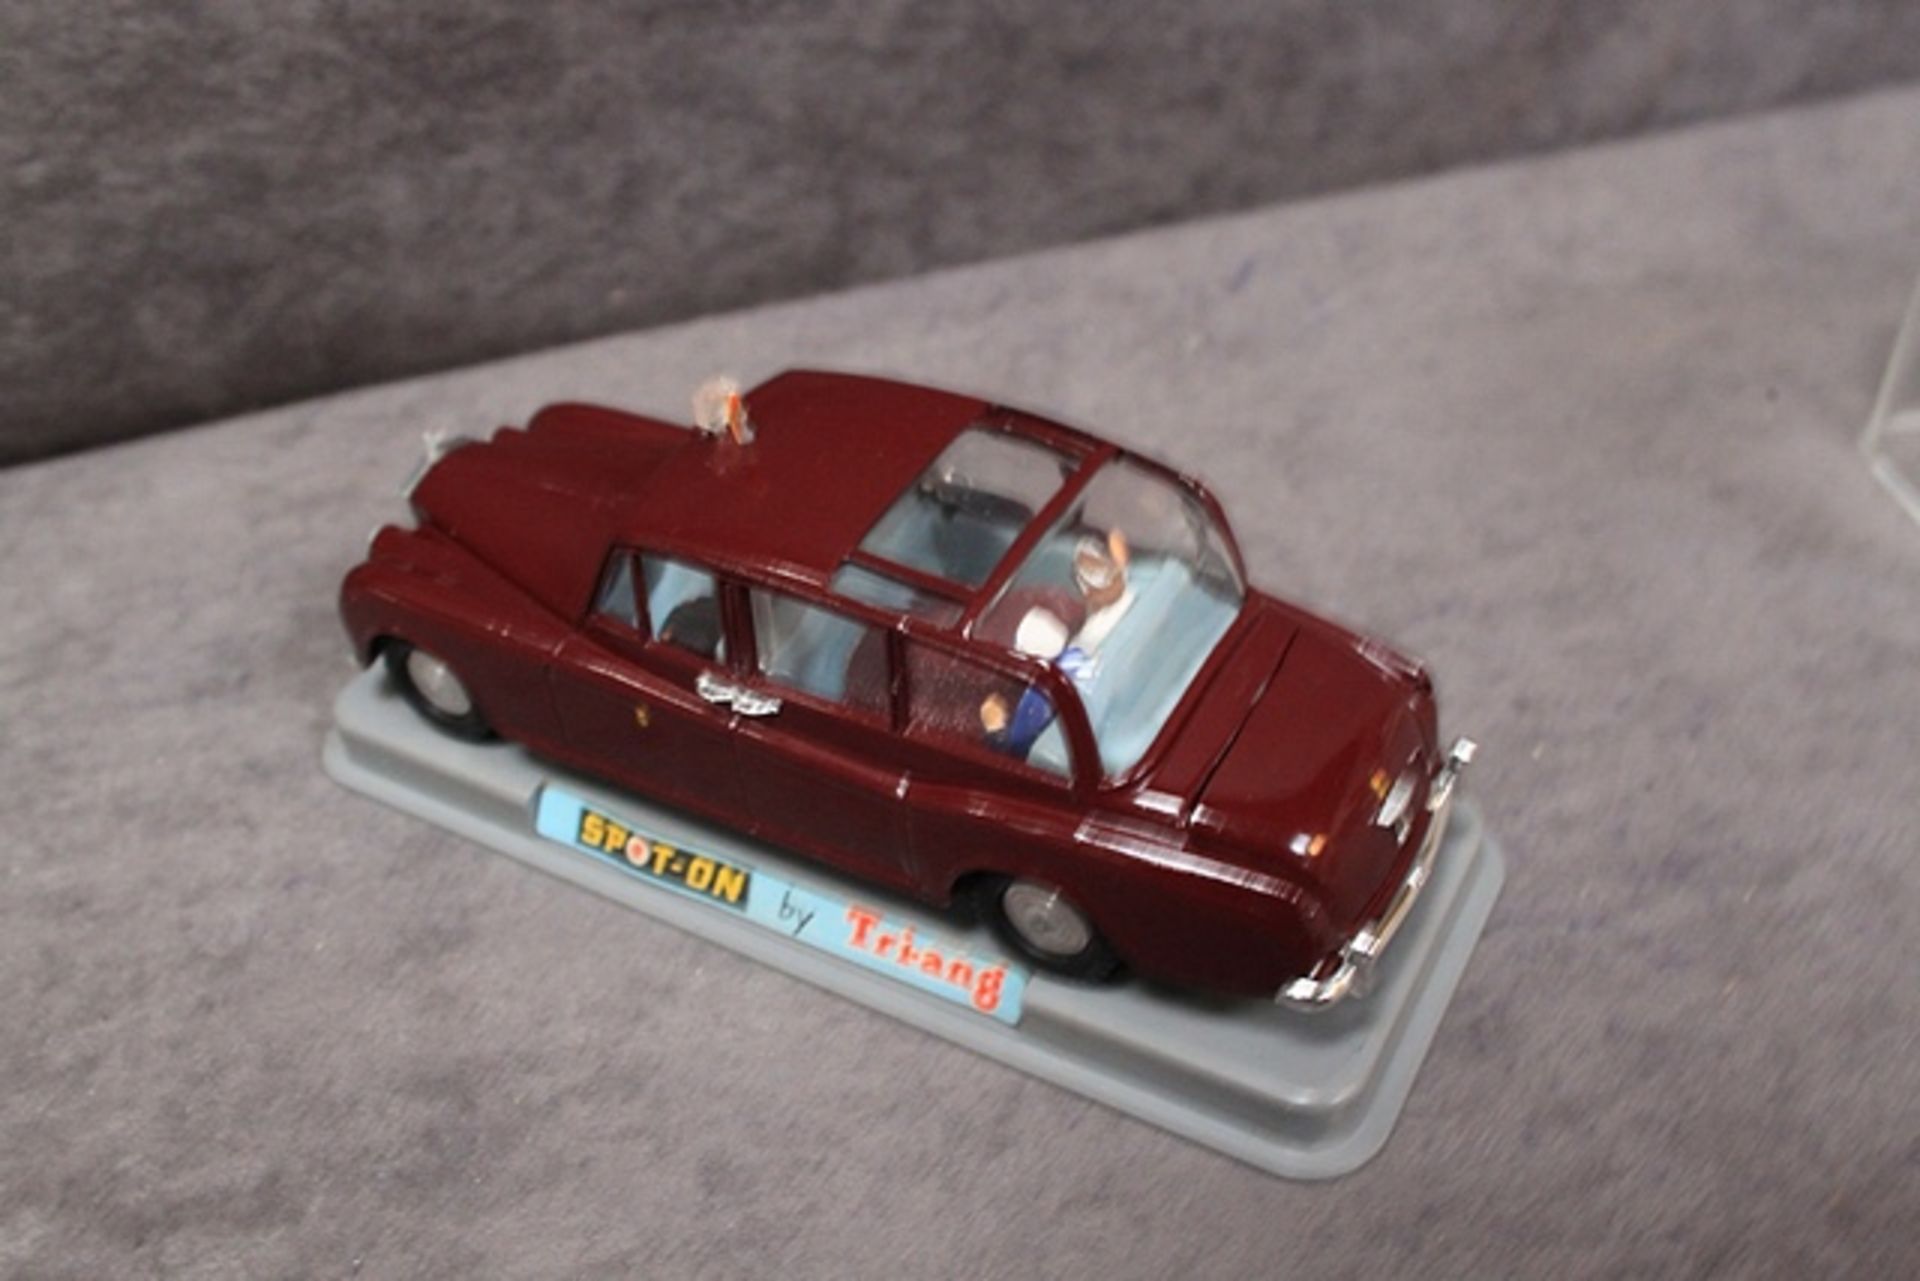 Rare Triang Spot-On Rolls Royce Phantom V in burgandy with Queen & Prince Phillip in the rear seats, - Image 3 of 4